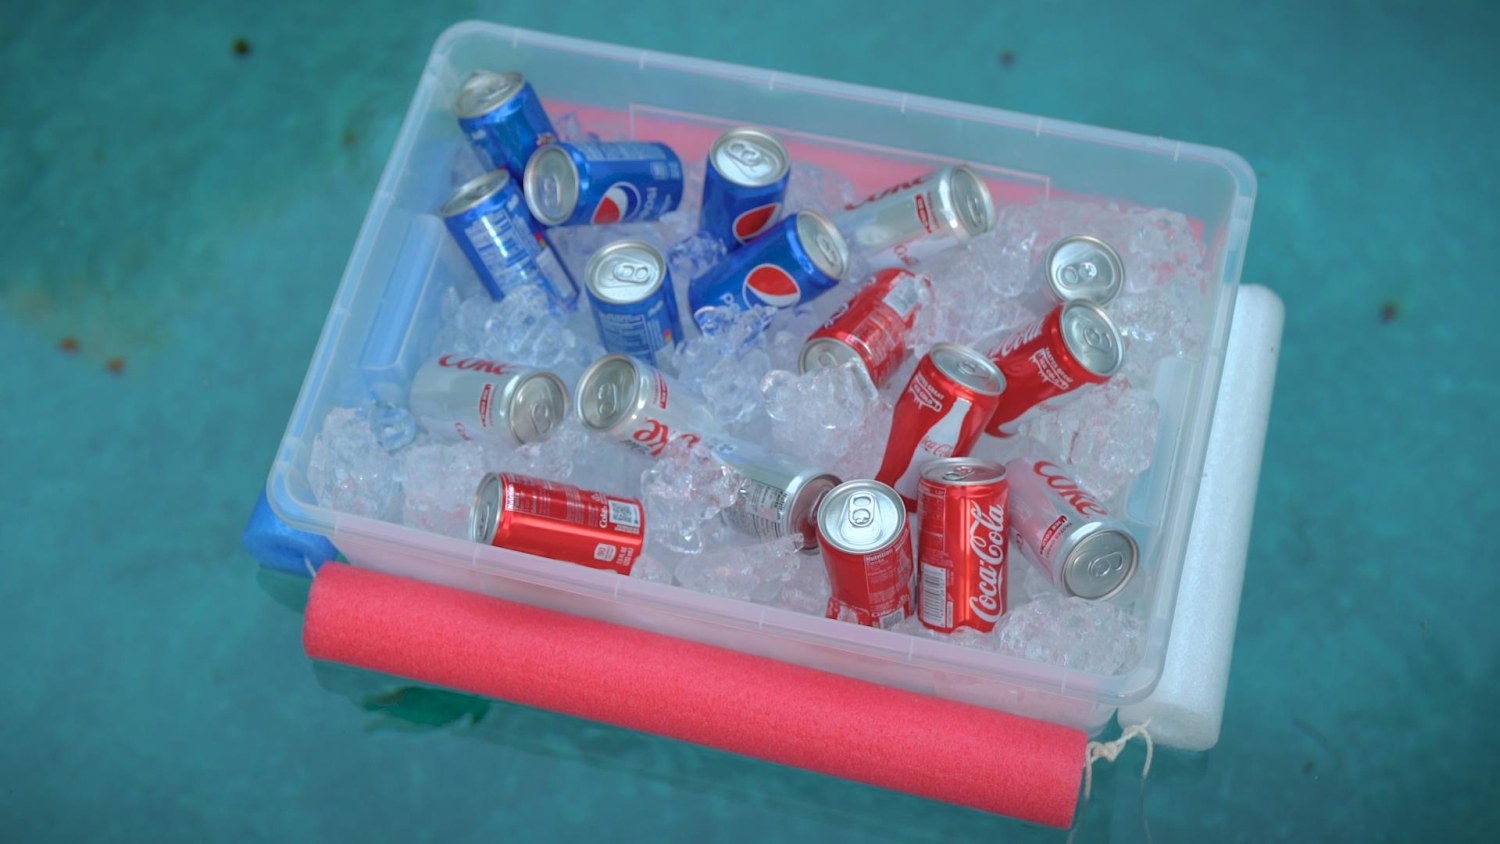 7 Best Floating Cooler Options to Float Snacks and Drinks All Summer